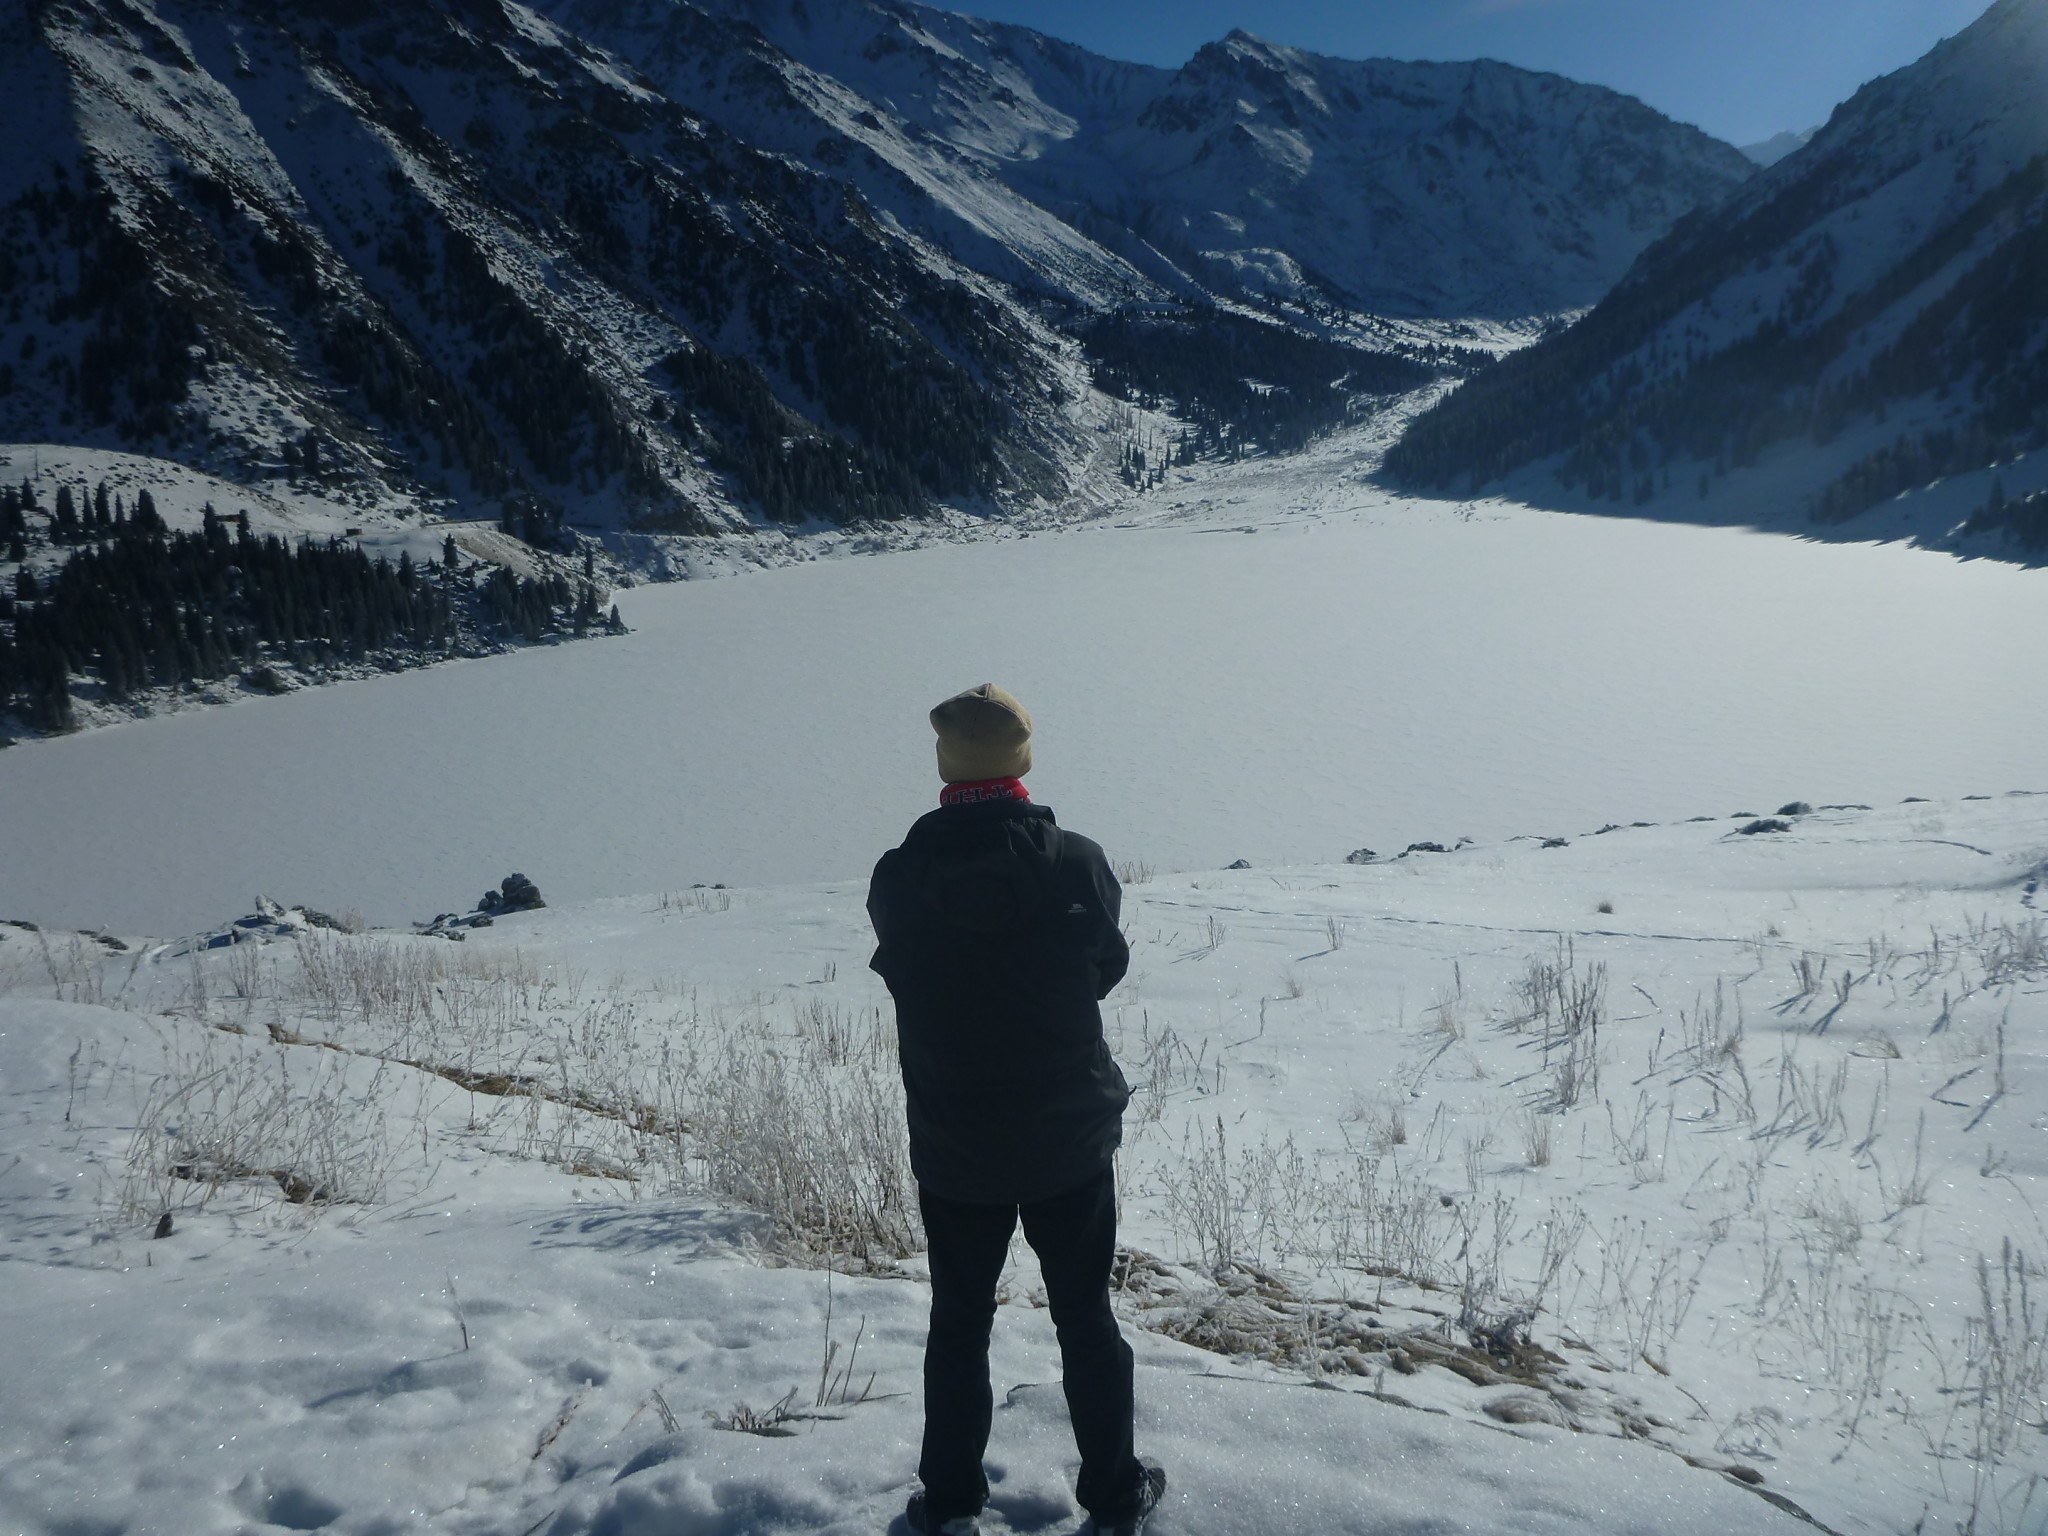 Simply in awe of the mountains of Kazakhstan and Almaty Lake below